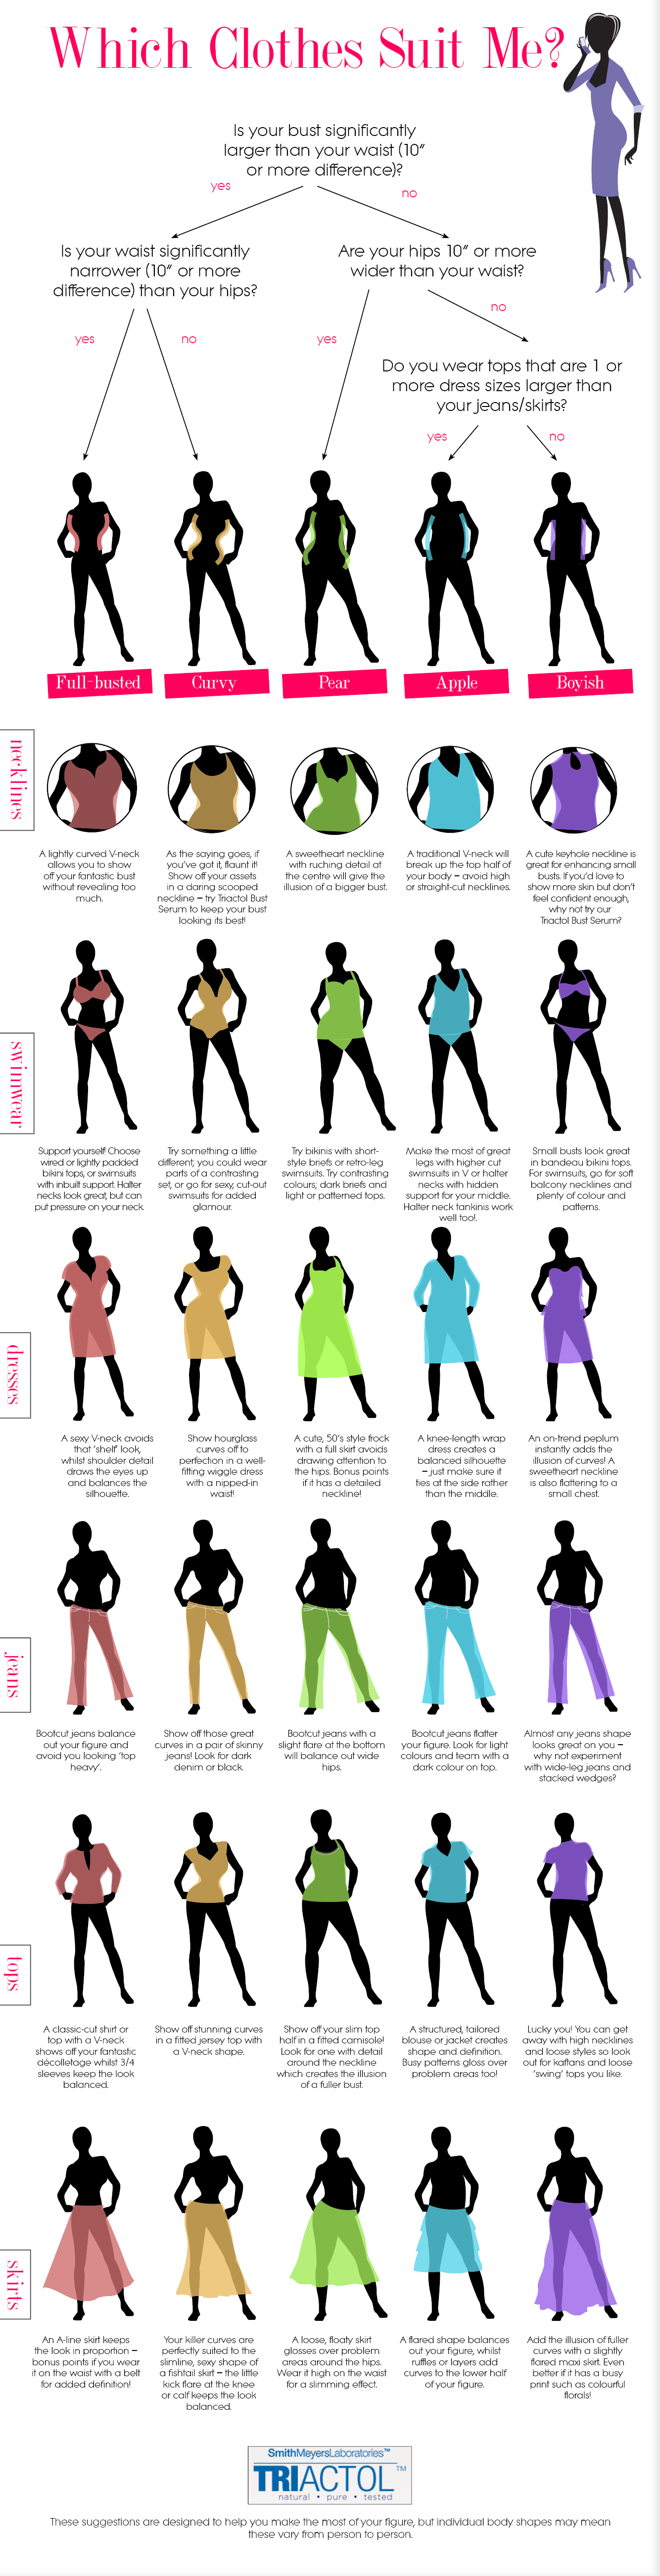 This is a guide for what clothing suits women based on their body type.   This i